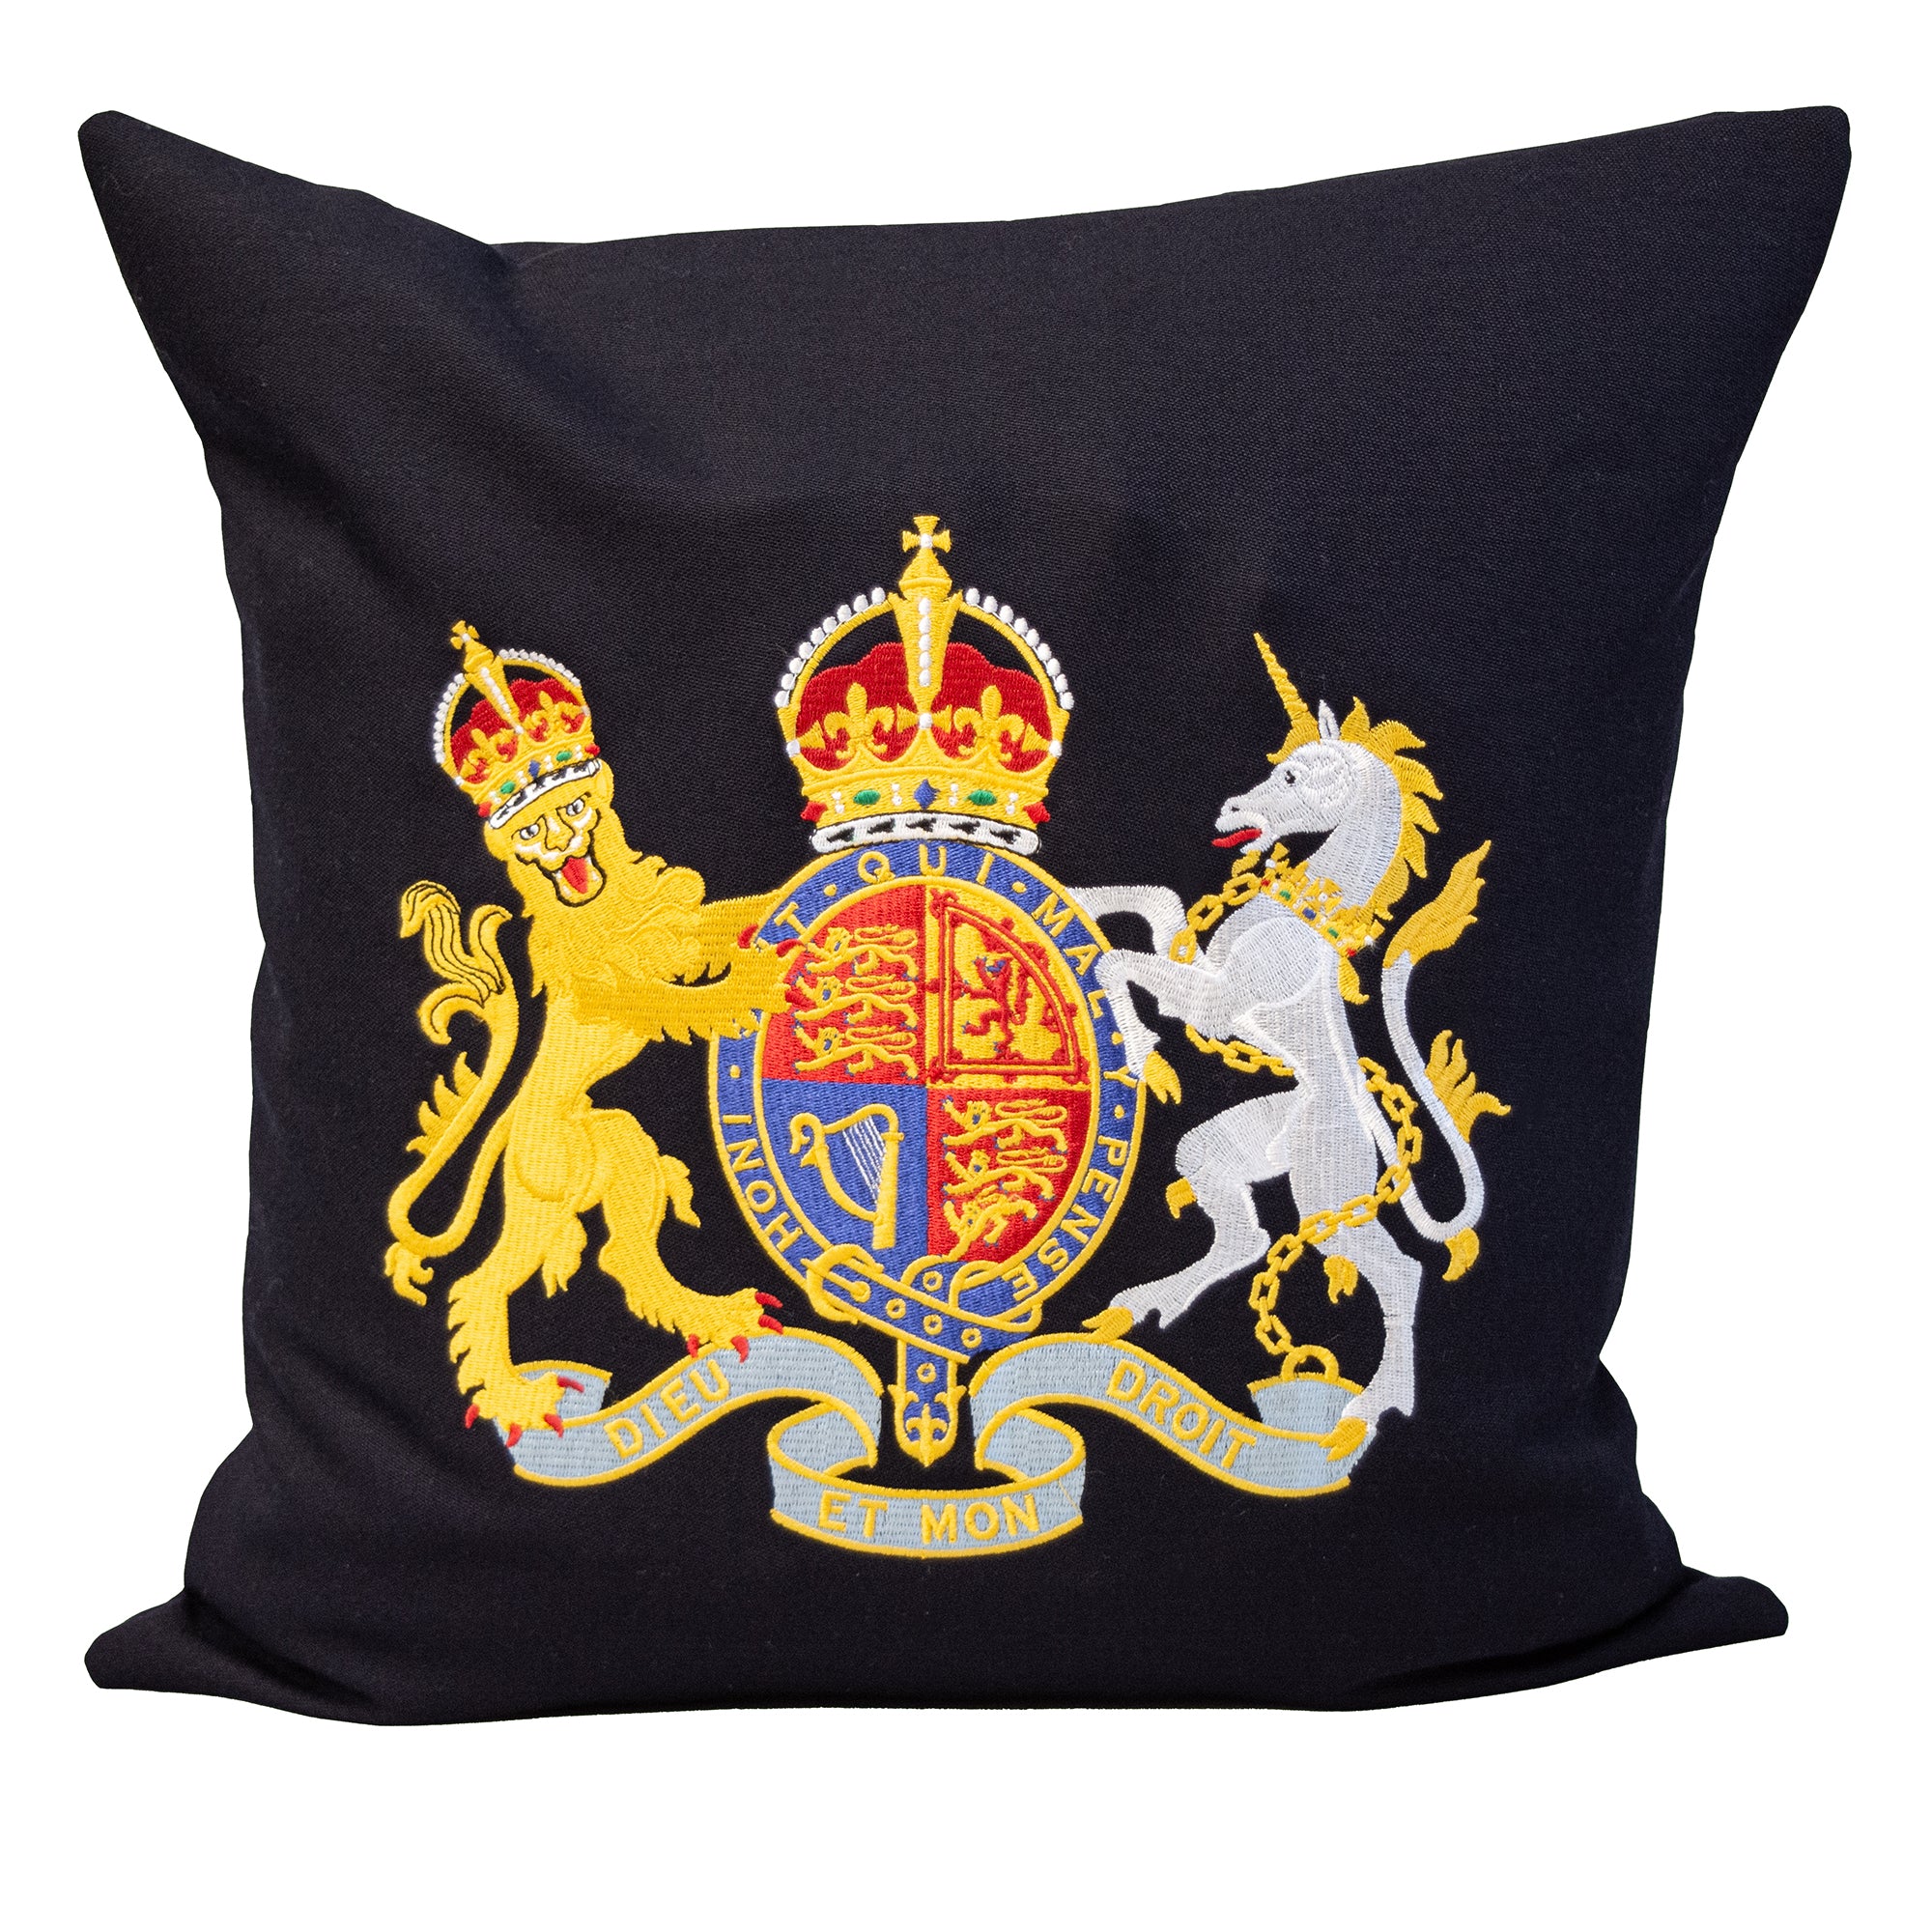 Lieutenancy and Royal Coat of Arms with Kings Crown - Machine Embroidered Cushion Cover